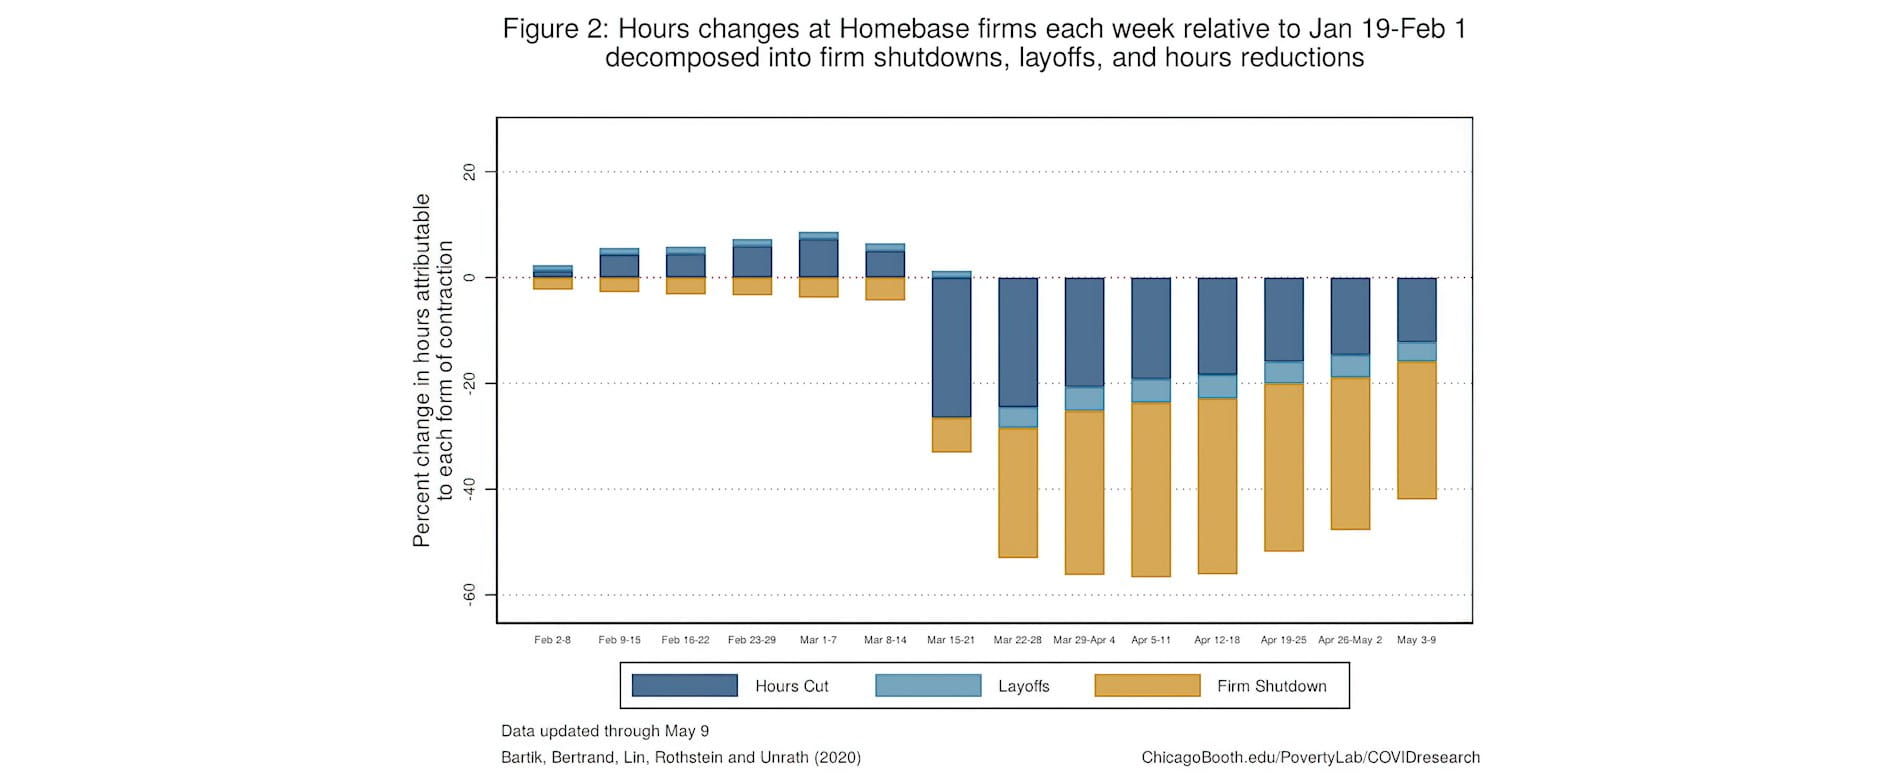 Bar graph showing hours reductions per week due to COVID-19